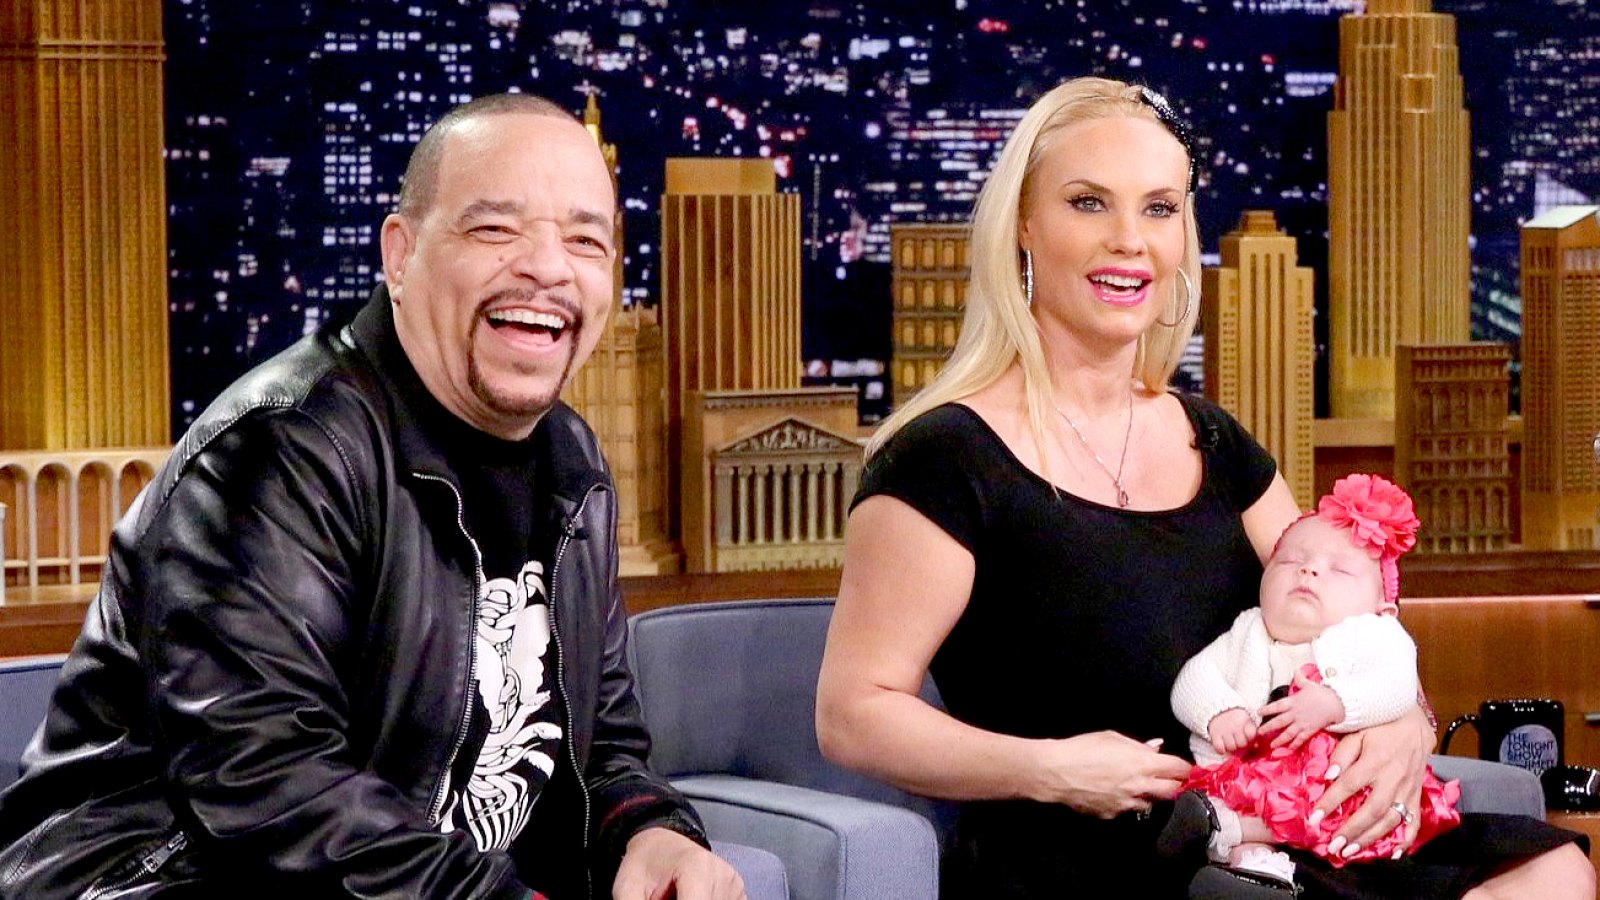 Ice-T and Coco Austin show off their daughter Chanel Nicole Marrow during an interview with host Jimmy Fallon on March 23, 2016